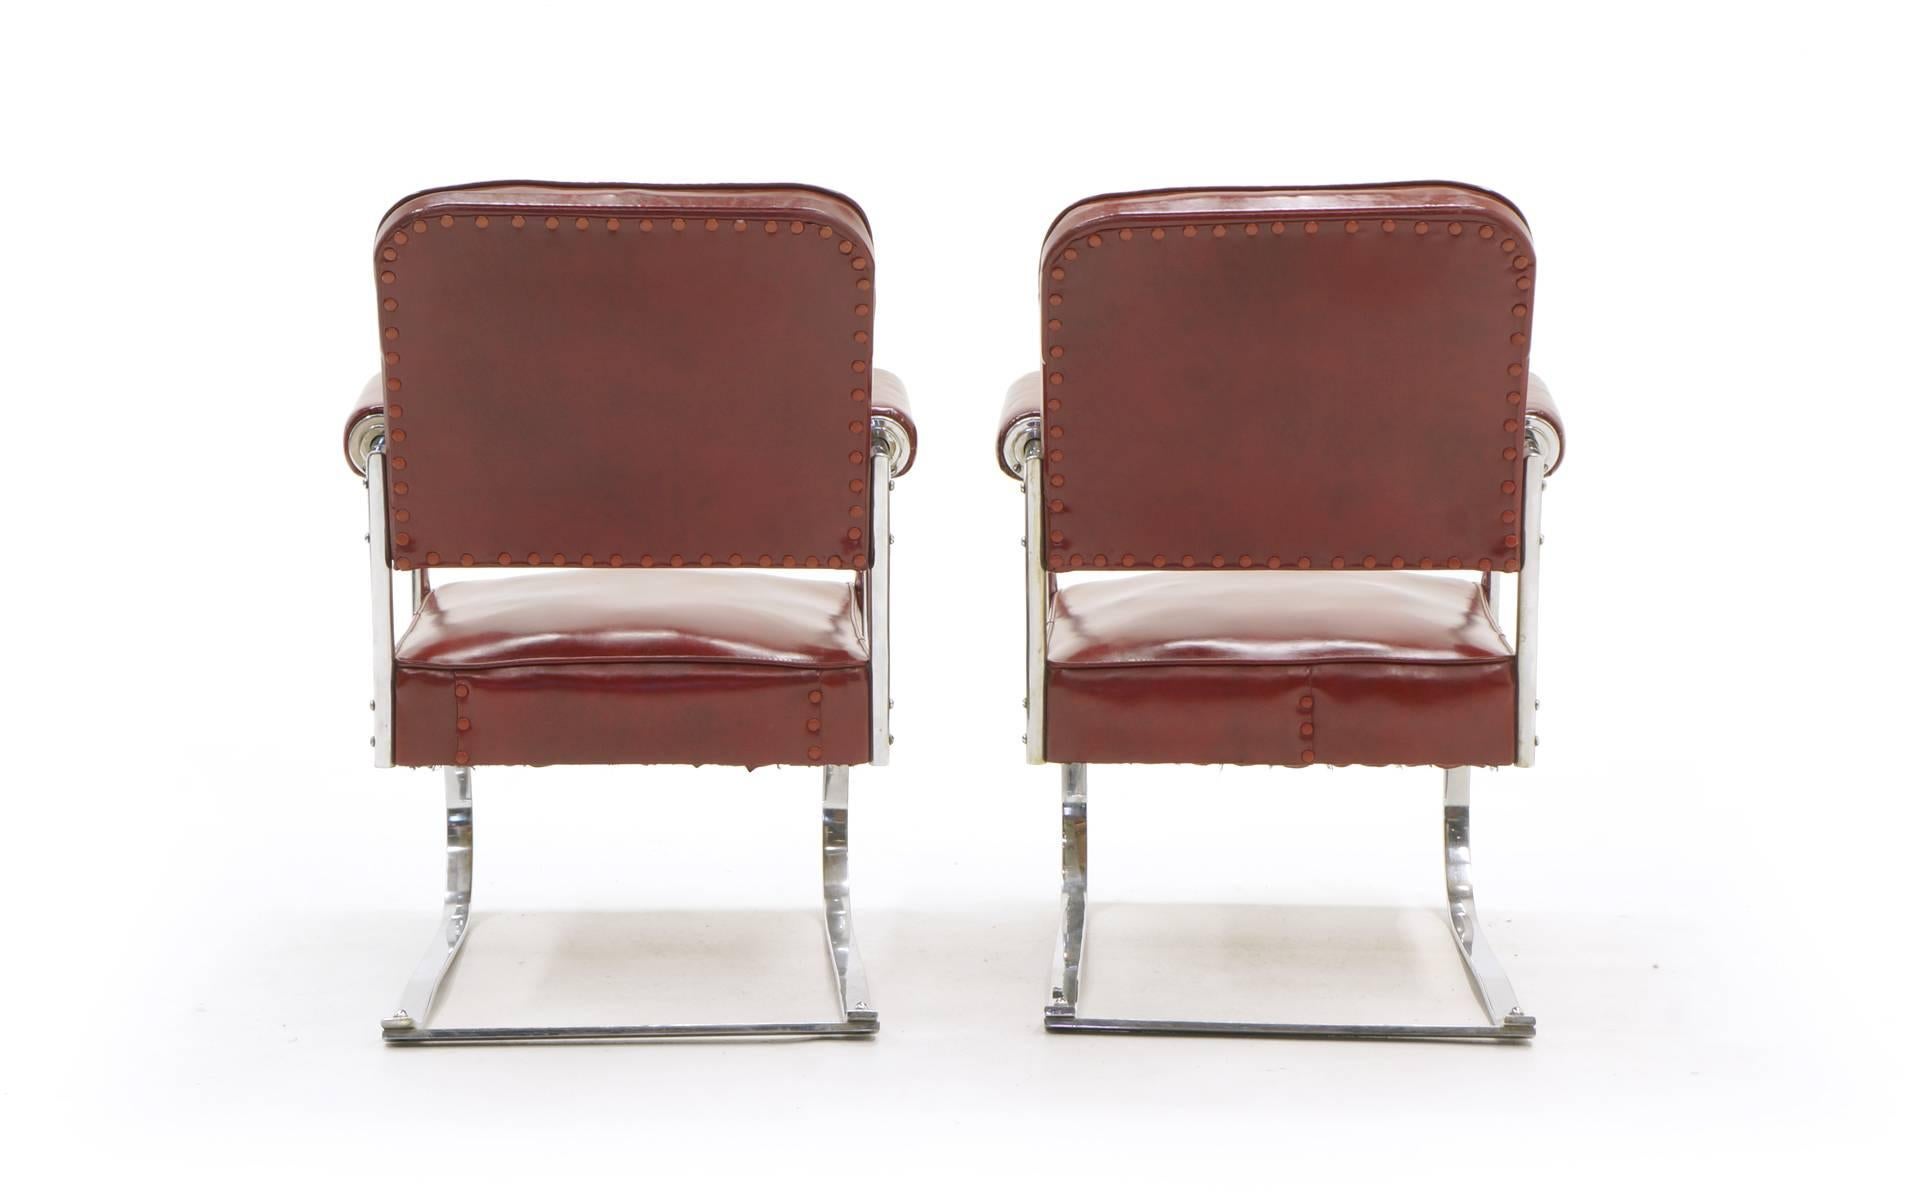 Mid-Century Modern Pair of Lounge Chairs by KEM Weber for Lloyd, Amazing Original Condition